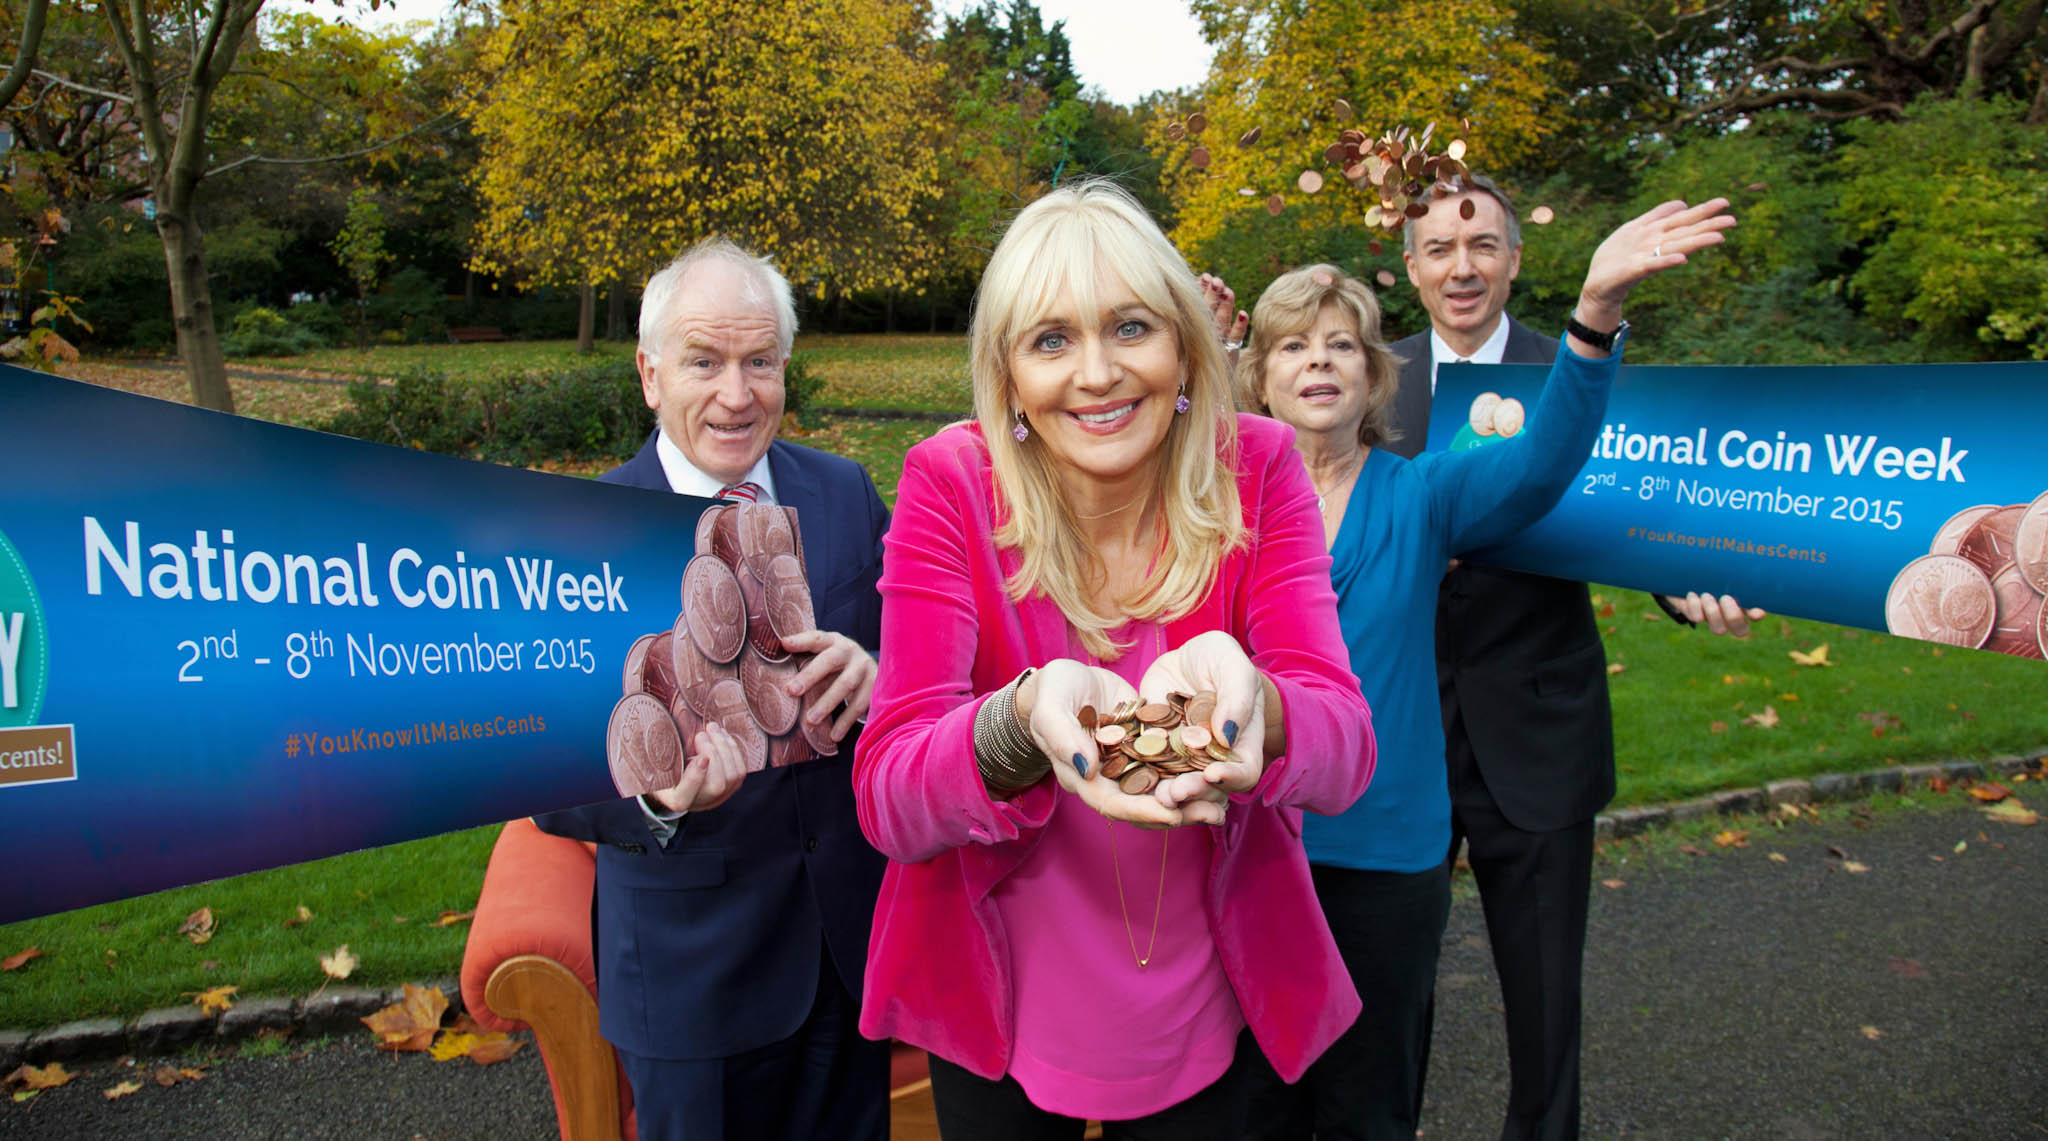 No fee for repro - please credit Paul Sherwood 35 MILLION EURO IN LOOSE CHANGE FOR IRISH CHARITIES!  National Coin Week 2nd Ð 8th November 2015  As The Central Bank rolls out the rounding of 1c and 2c coins this Wednesday, October 28th, 'Change for Charity' is launching ÒNational Coin WeekÓ where the people of Ireland are being asked to donate their coppers to this campaign.  There are over Û35 MILLION of these coins in peopleÕs homes and offices in bottles and jars which will soon be of no use to anyone, so the ÒChange For CharityÓ campaign is encouraging people to put these coins to good use during 'National Coin Week' which takes place from 2nd - 8th of November.  The campaign has over 3,000 collection receptacles all over the country in schools, shops and banks. Every AIB and BANK OF IRELAND branch has a receptacle - thereÕs no need to queue, count or sort your coins, simply drop them into one of the collection units in any branch nationwide.  The proceeds of the campaign will be divided between a number of charities Ð the Irish Heart Foundation, St Francis Hospice, Our LadyÕs Hospice & Care Services, and Gaisce Ð The President's Awards. However, NO-ONE is excluded - in addition to these charities, another strand of income is being reserved for smaller charities, community projects and youth groups, who would like to apply for smaller amounts of funding but donÕt have the resources to be involved in the overall project.  Currently, there are 47 charities on a waiting list for funding but 'Change for Charity' will only be in a position to help these charities if the whole country gets behind this campaign during NATIONAL COIN WEEK and brings their unwanted coppers to their collection units nationwide.  Pictured - Minister Jimmy Deenihan TD, Miriam OÕCallaghan,  Norma Smurfit, Barry Dempsey CEO Irish Heart Foundation